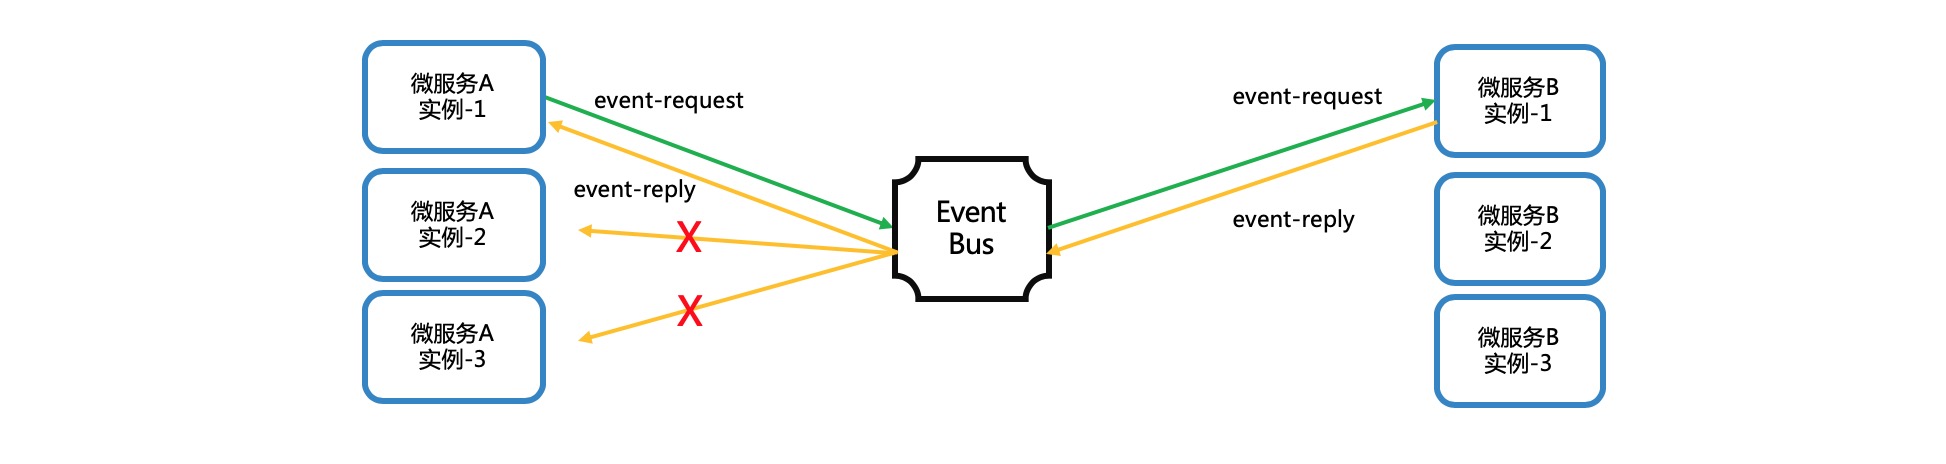 two-events-as-one-command